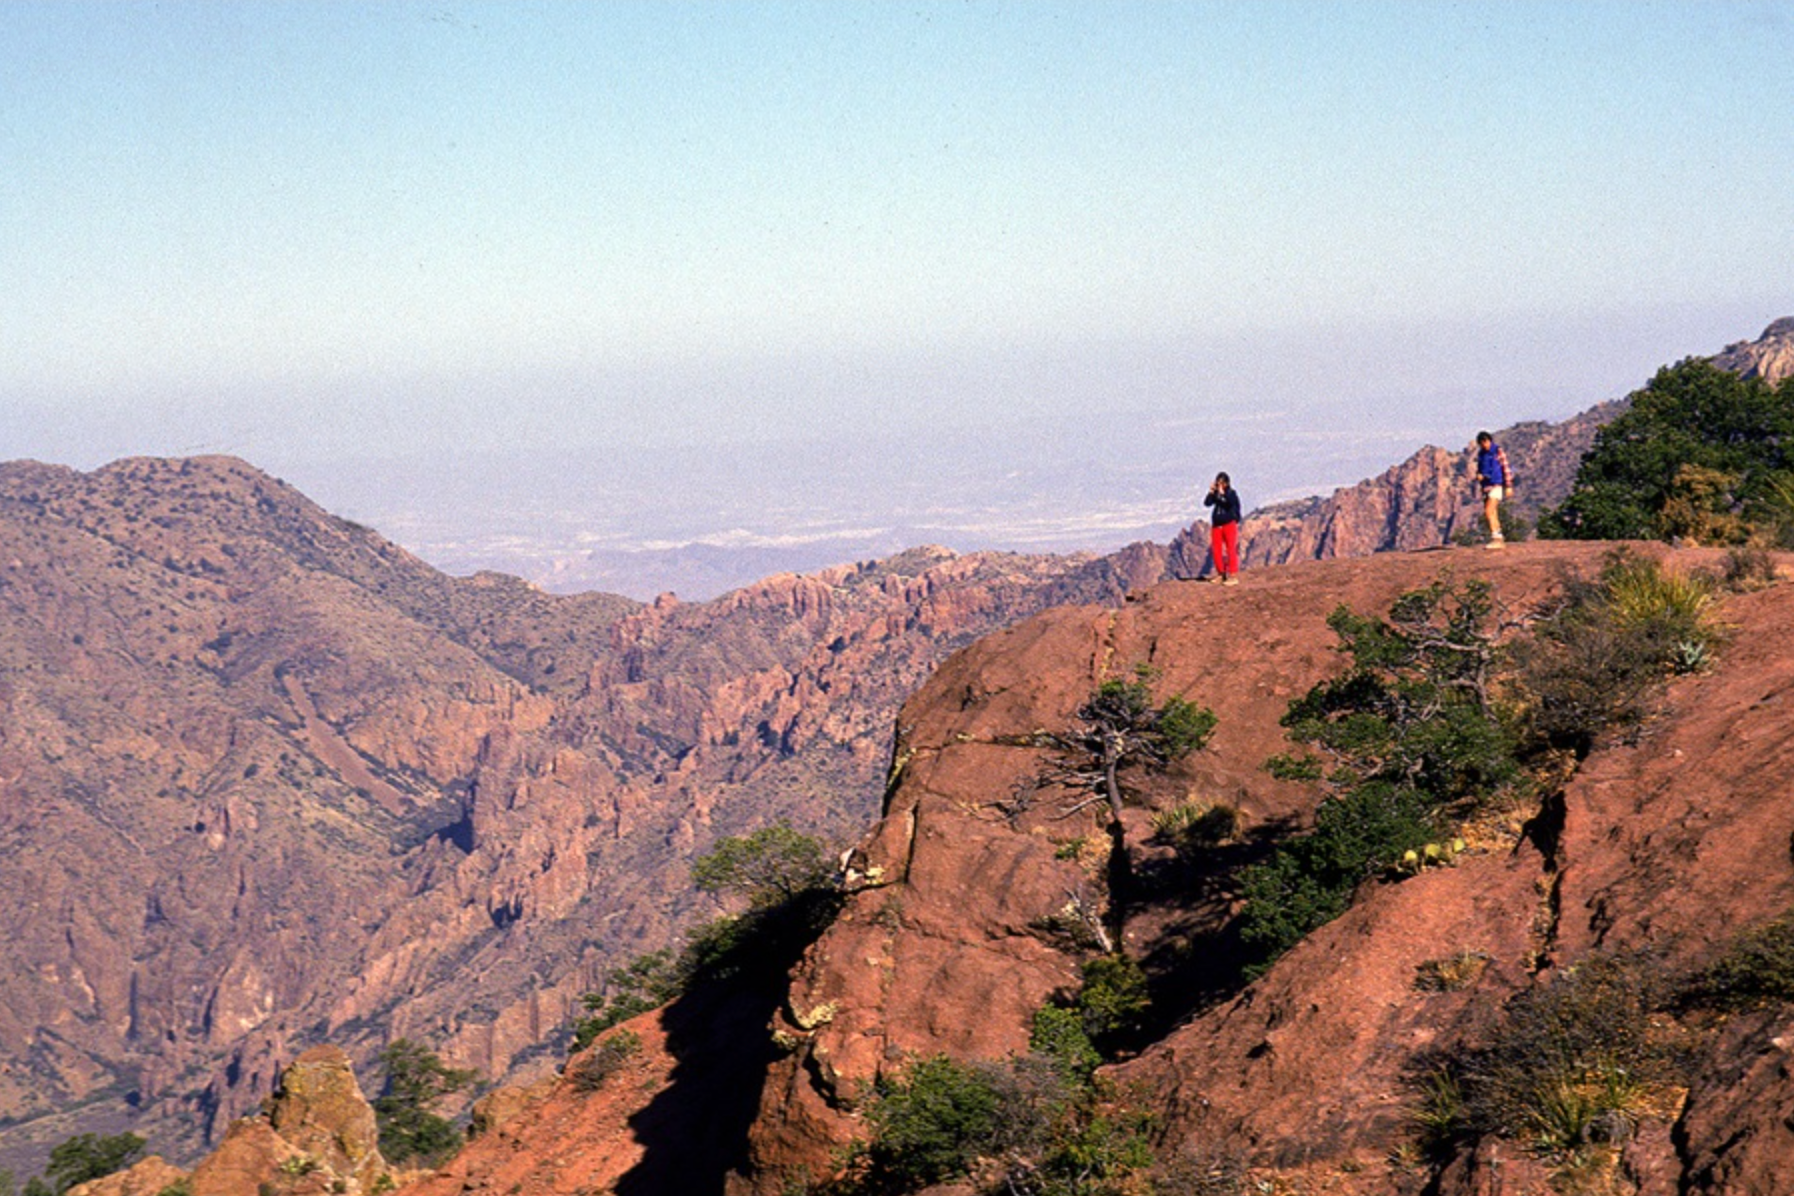 People overlooking the Chisos Mountains